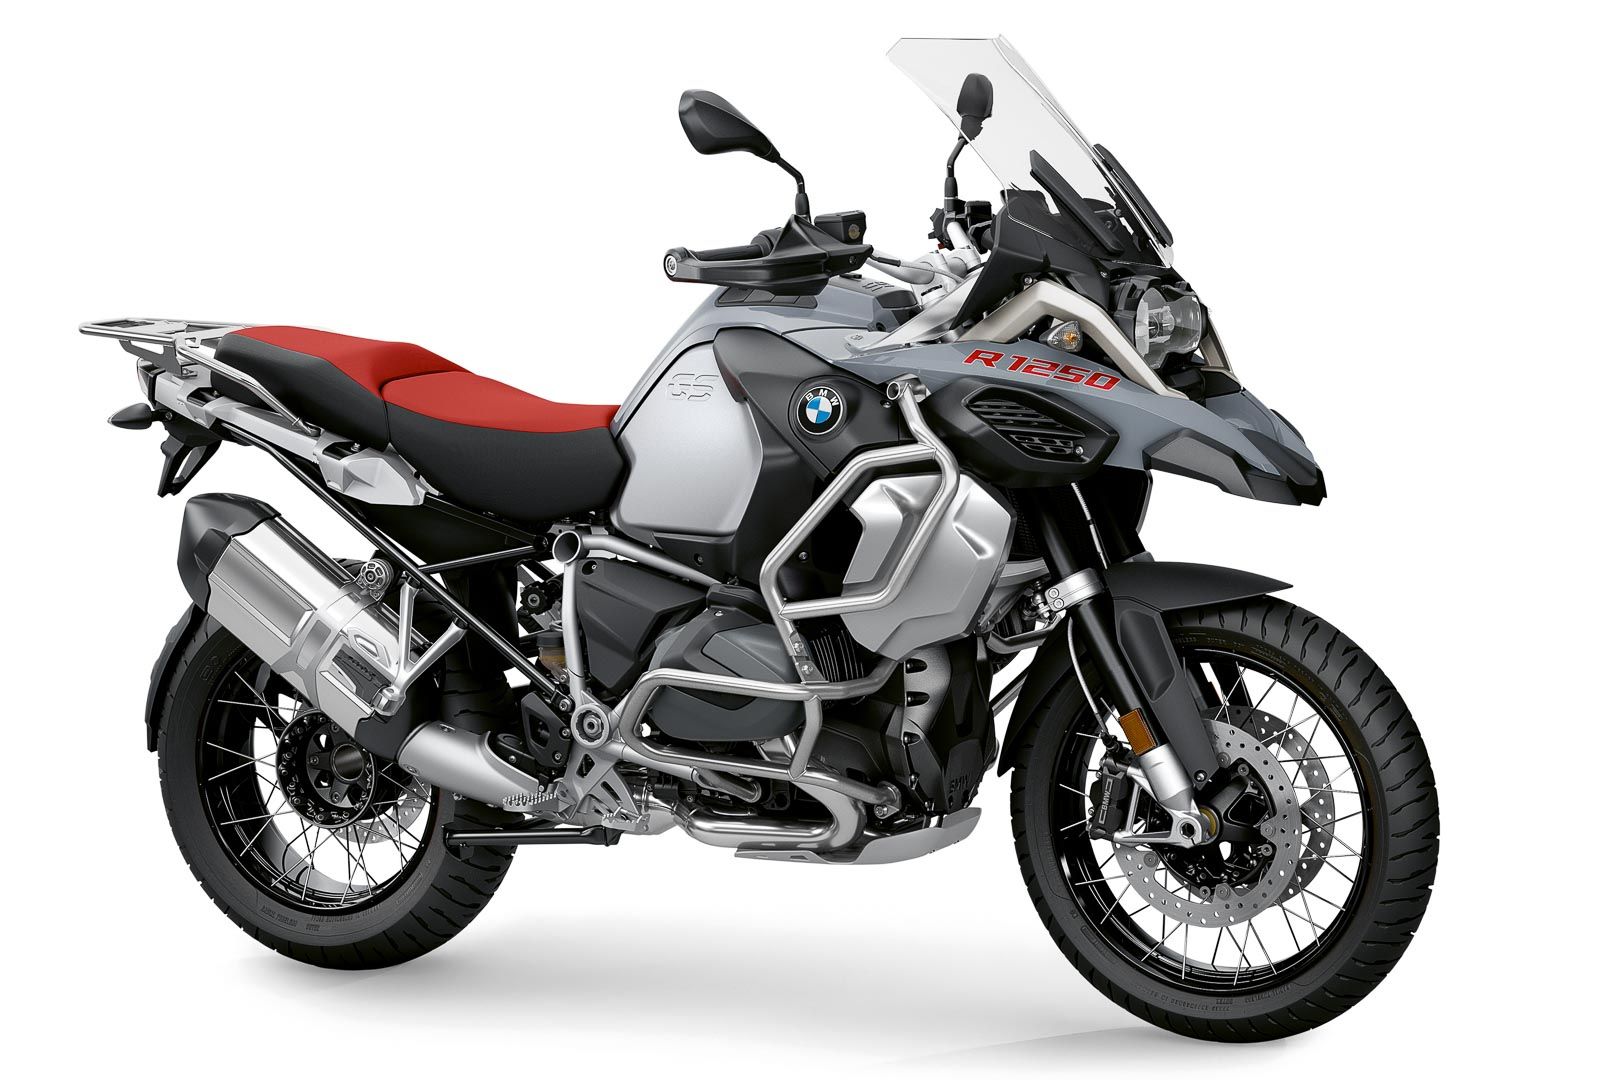 BMW R 1250 GS Adventure Buyer's Guide: Specs & Prices